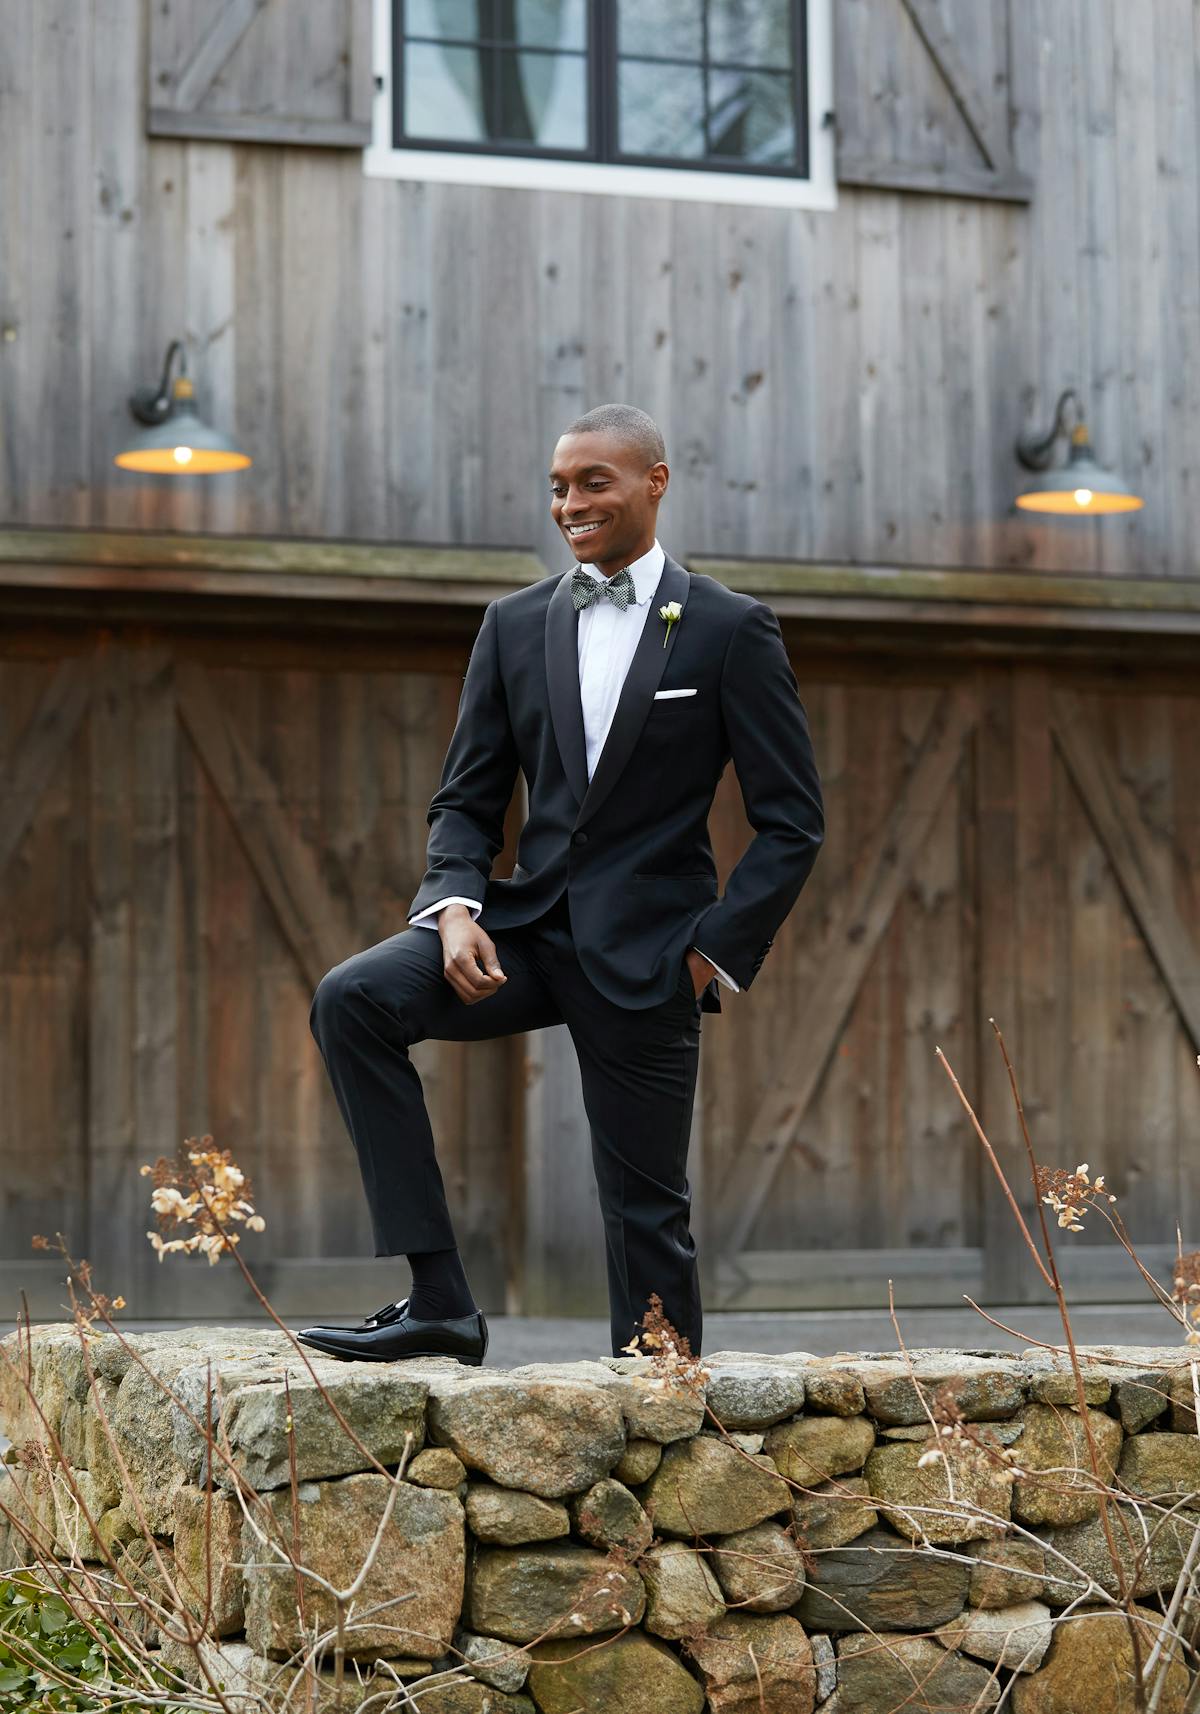 Enhance Much Unreadable Brown Shoes with a Black Tuxedo? | SuitShop